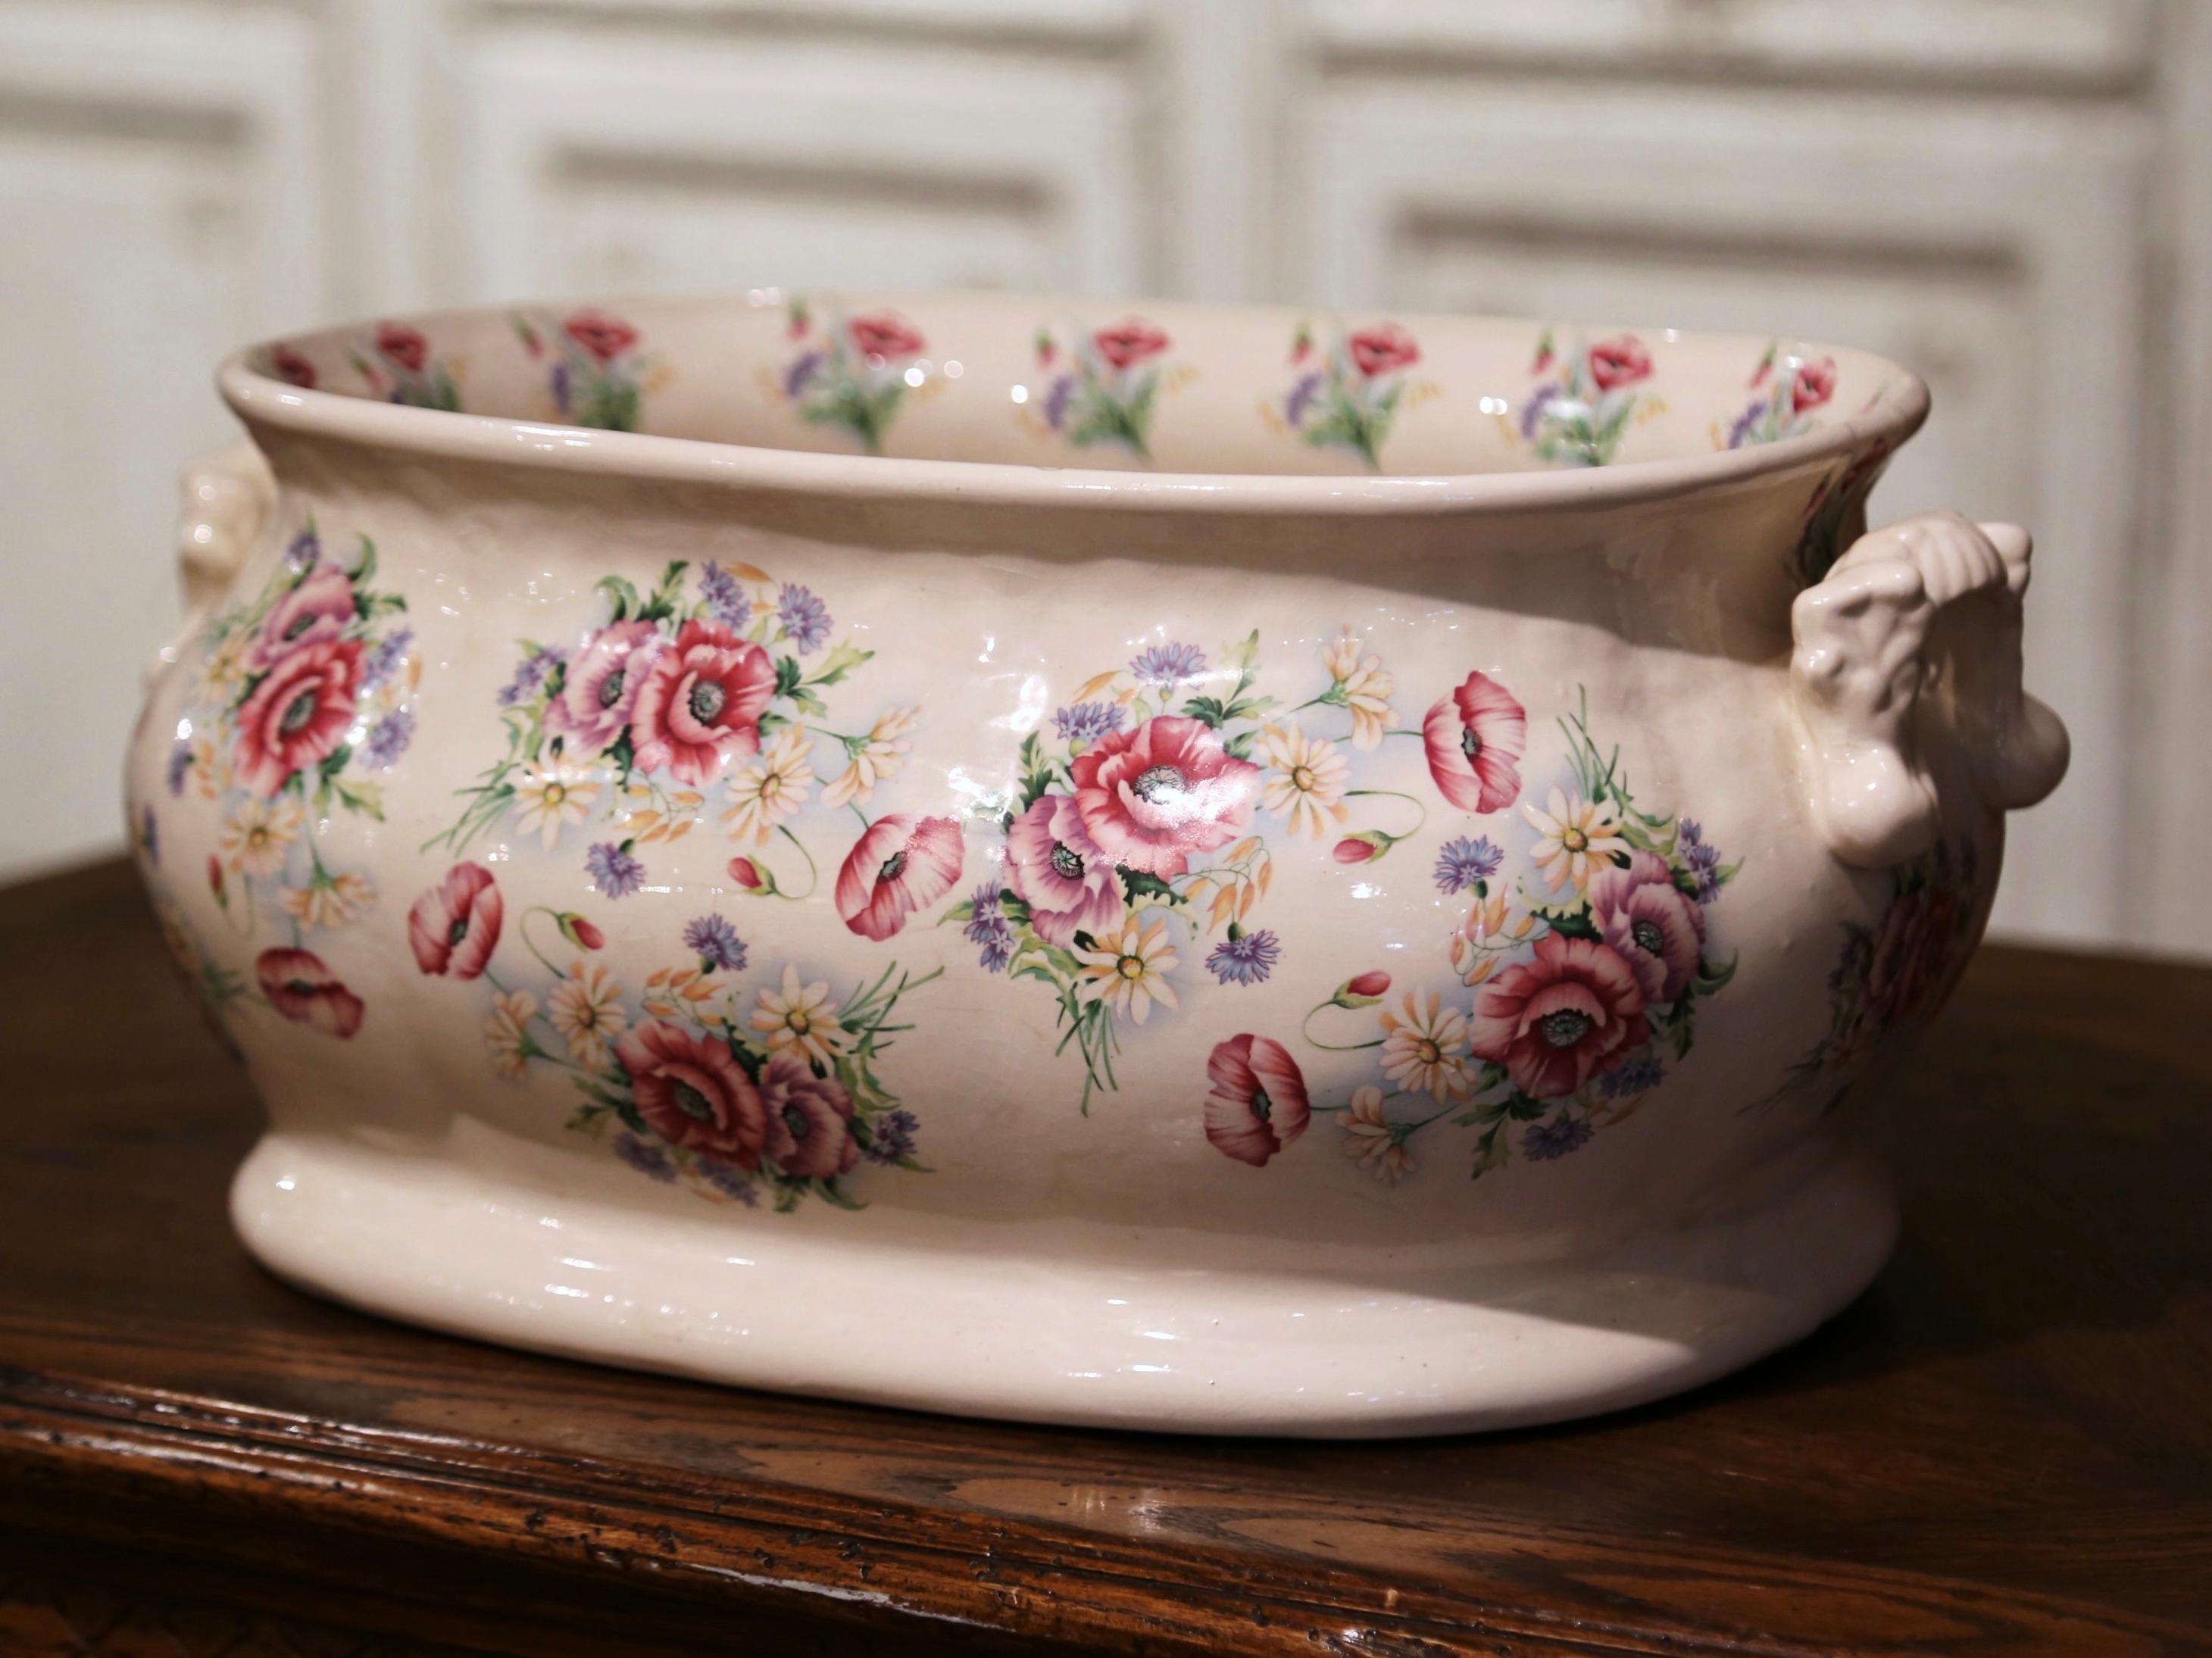 Hand-Painted Early 20th Century English Painted Porcelain Foot Bath Bowl